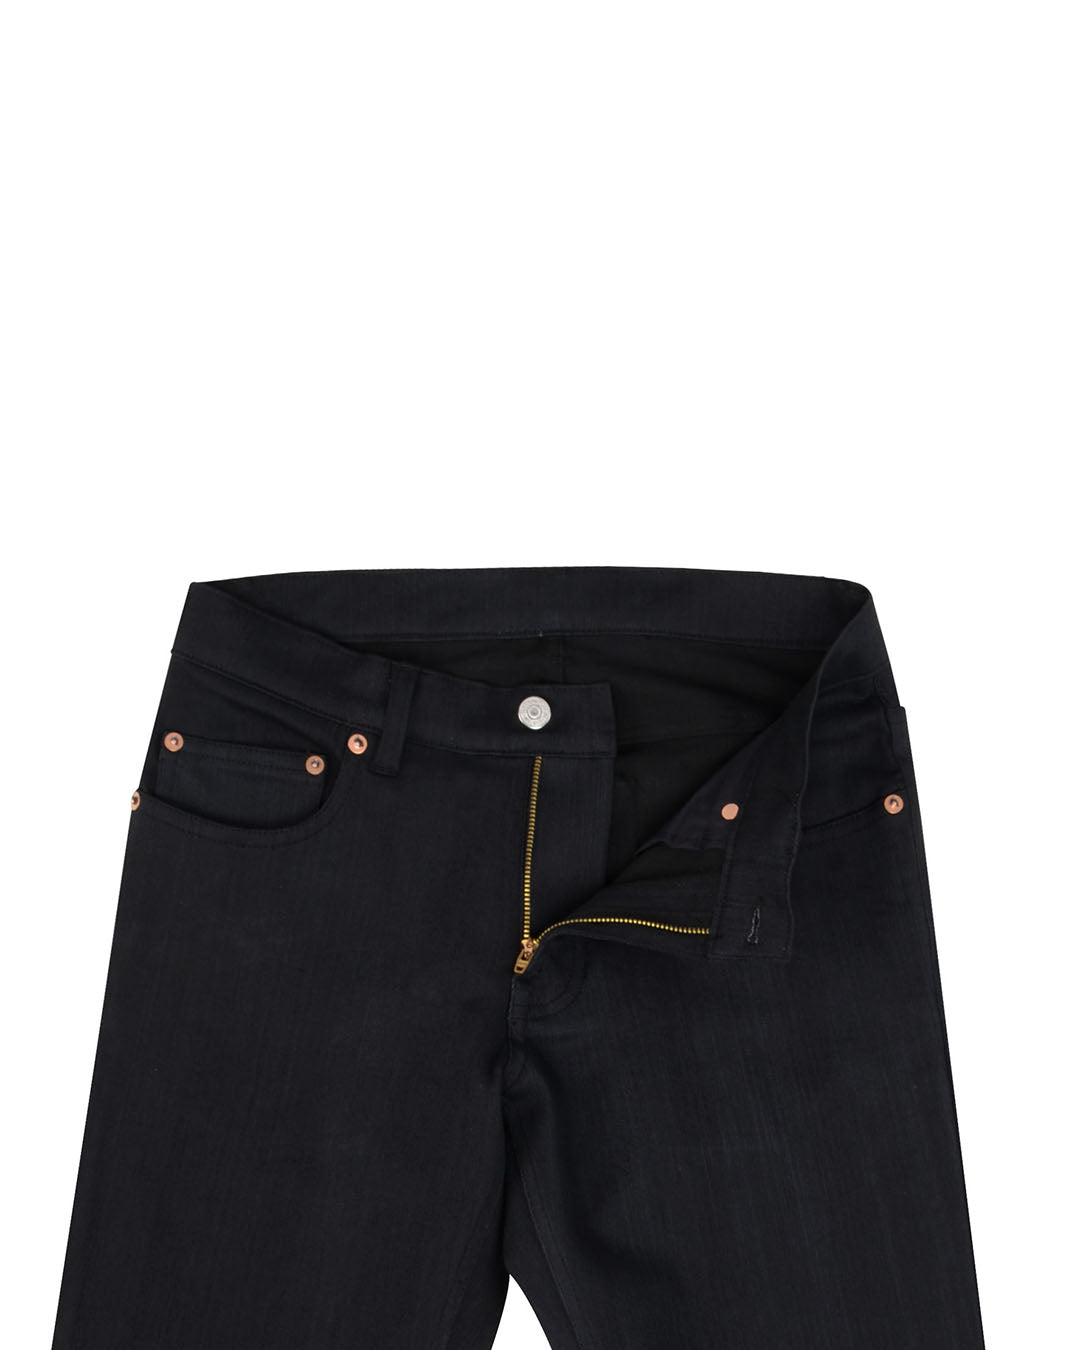 Front open view of stretch denim jeans for men by Luxire in black